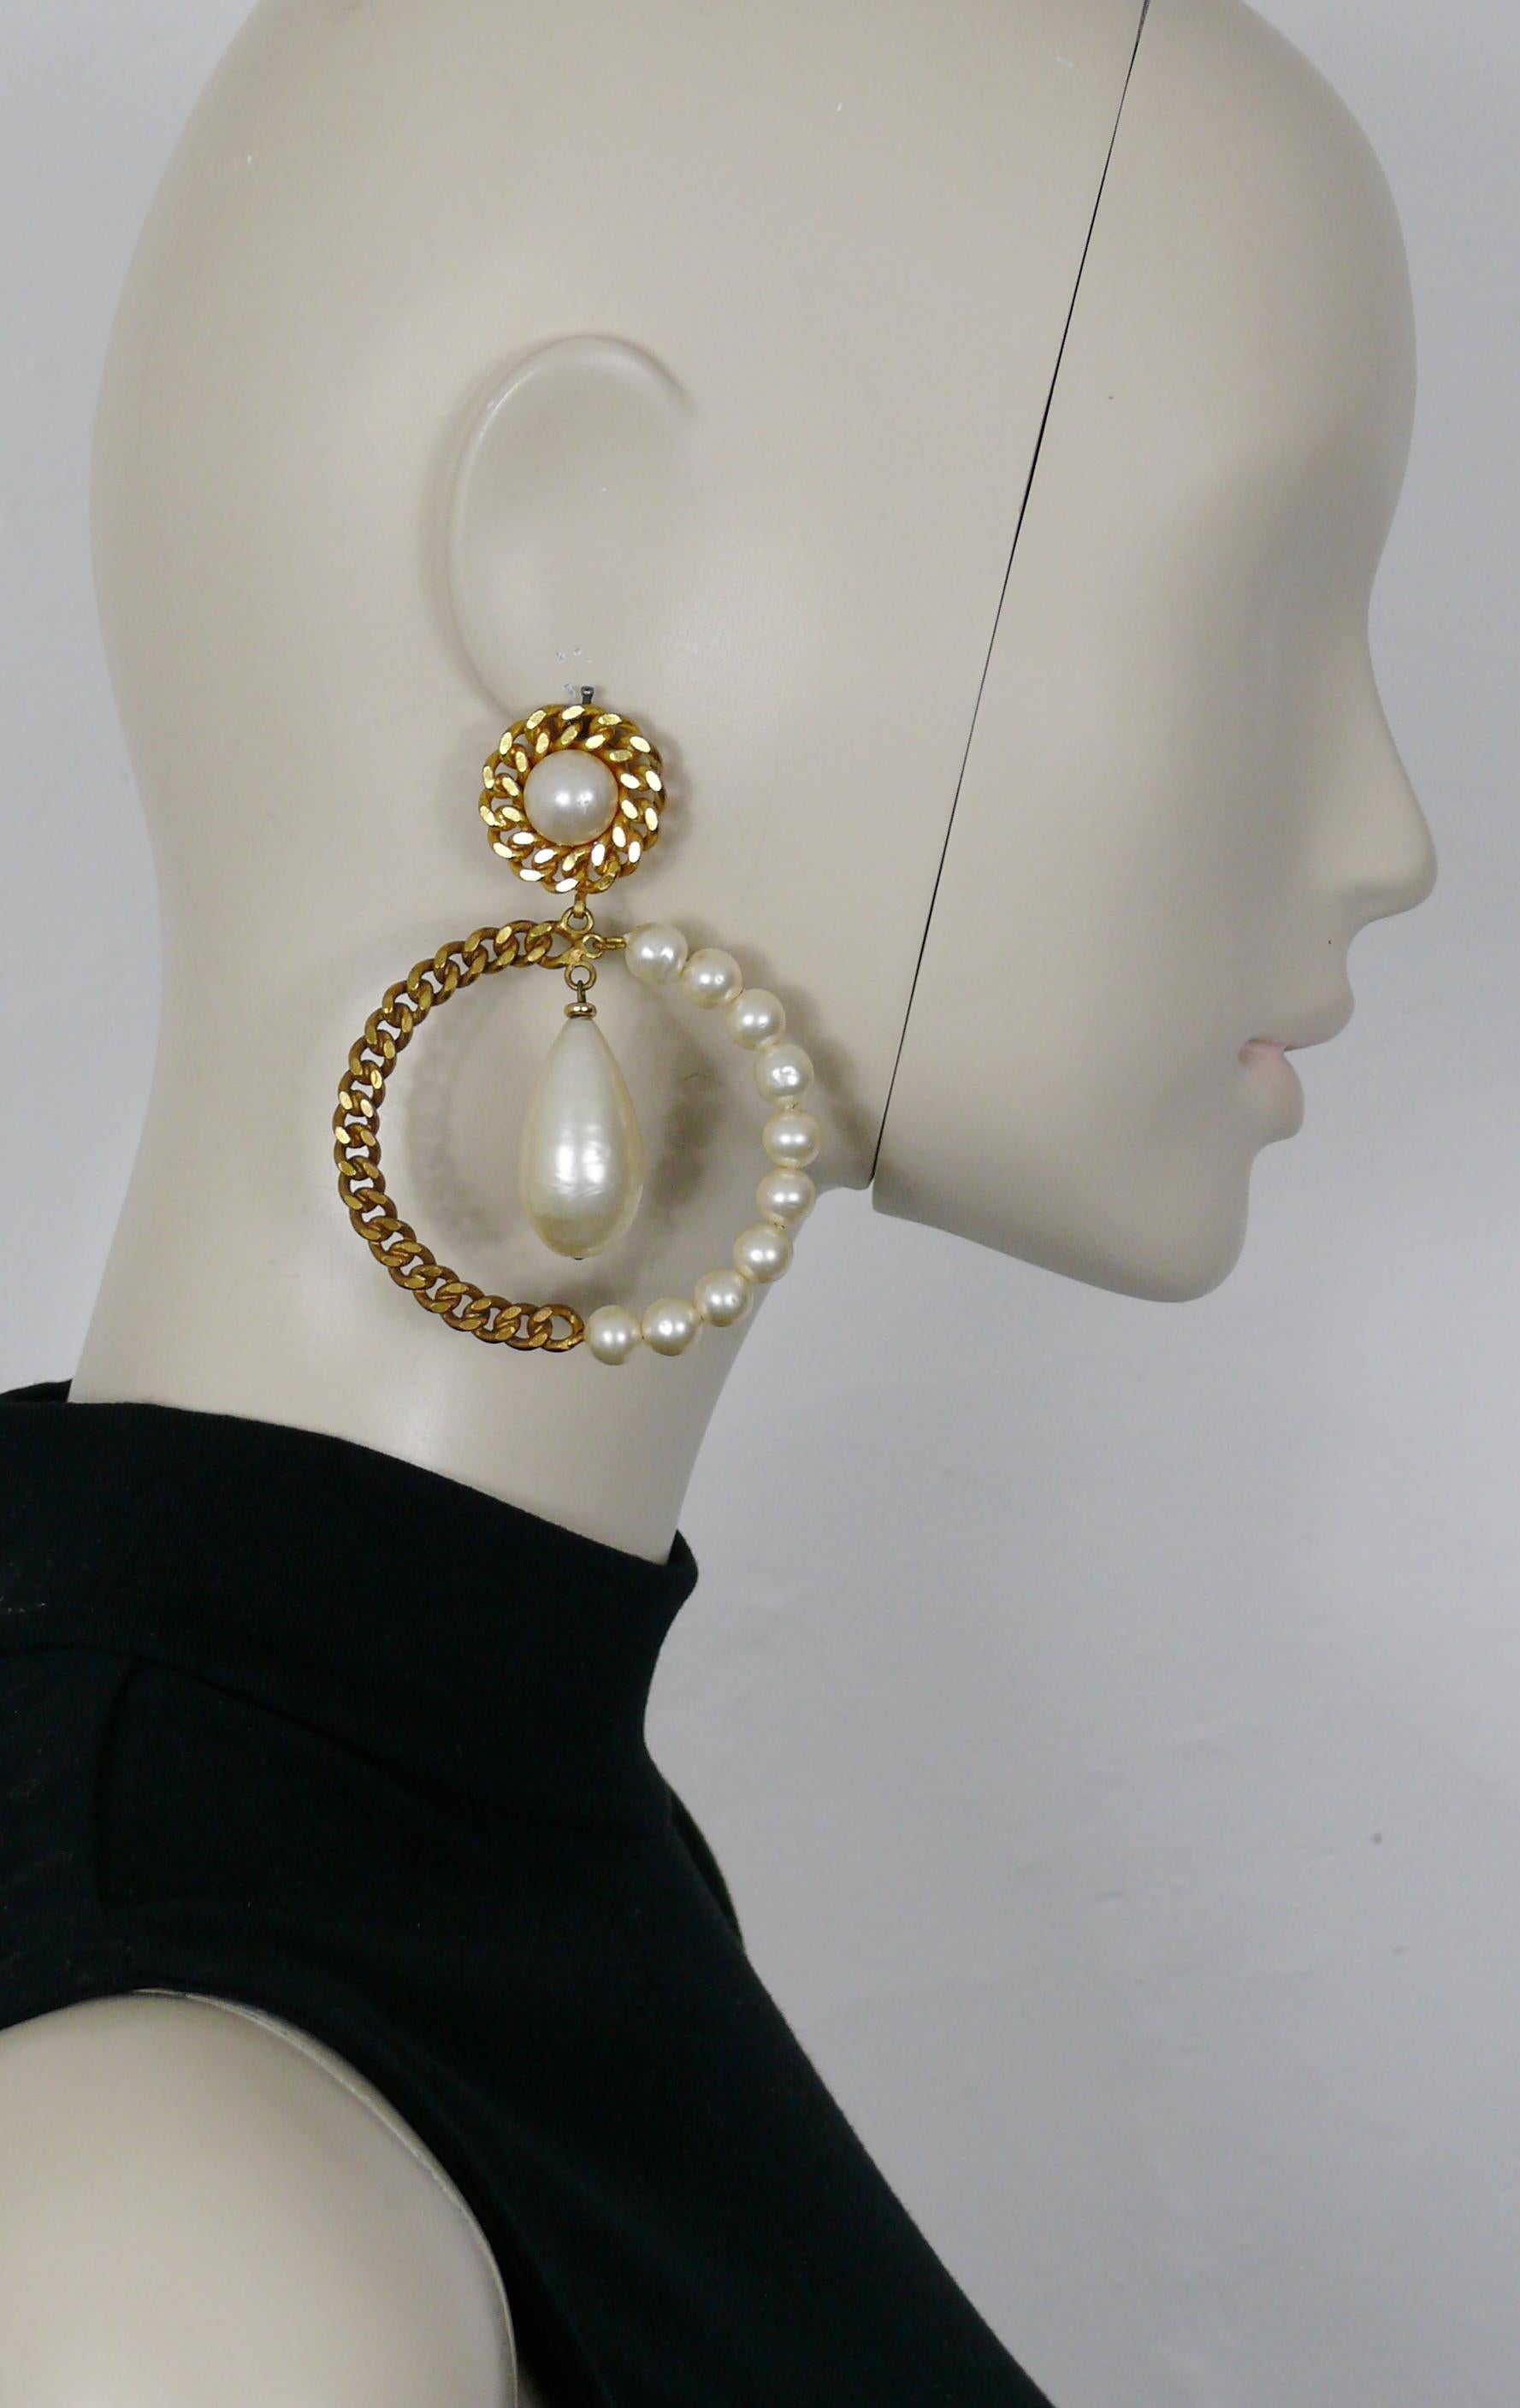 CHANEL vintage massive and iconic gold toned chain and faux pearl hoop hearrings (clip-on) featuring a large pearl drop.

Embossed CHANEL Made in France.

Indicative measurements : height approx. 8.7 cm (3.43 inches) / max. diameter approx. 6.5 cm